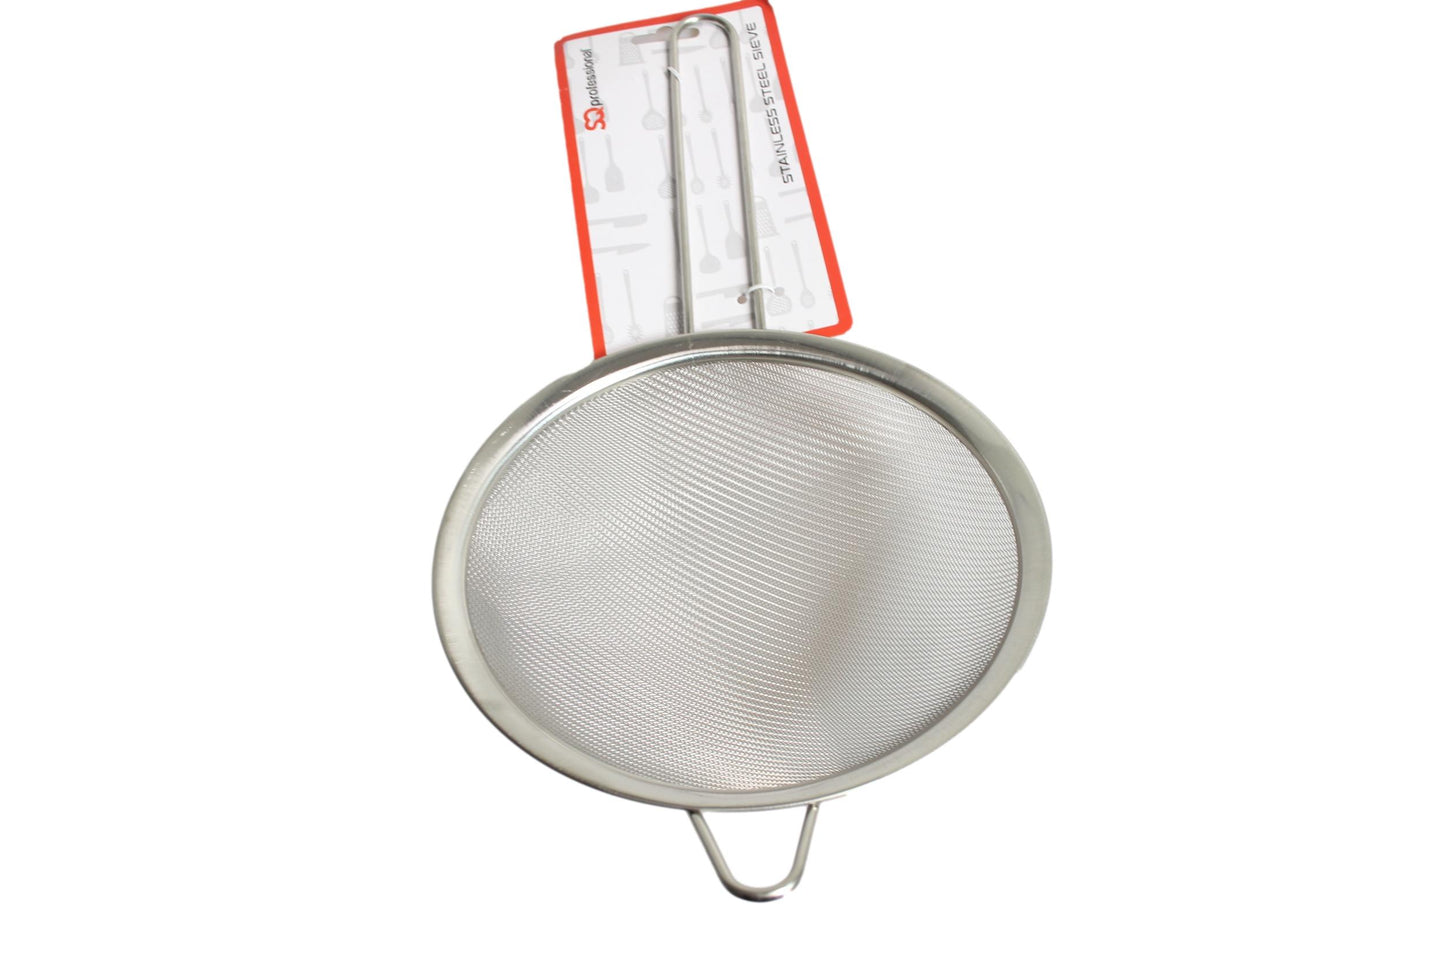 Stainless Steel Sieve Fine Mesh Strainer For Pasta Rice Sifting Flour Sugar Tea Icing 20x8cm 125g (Parcel Rate)